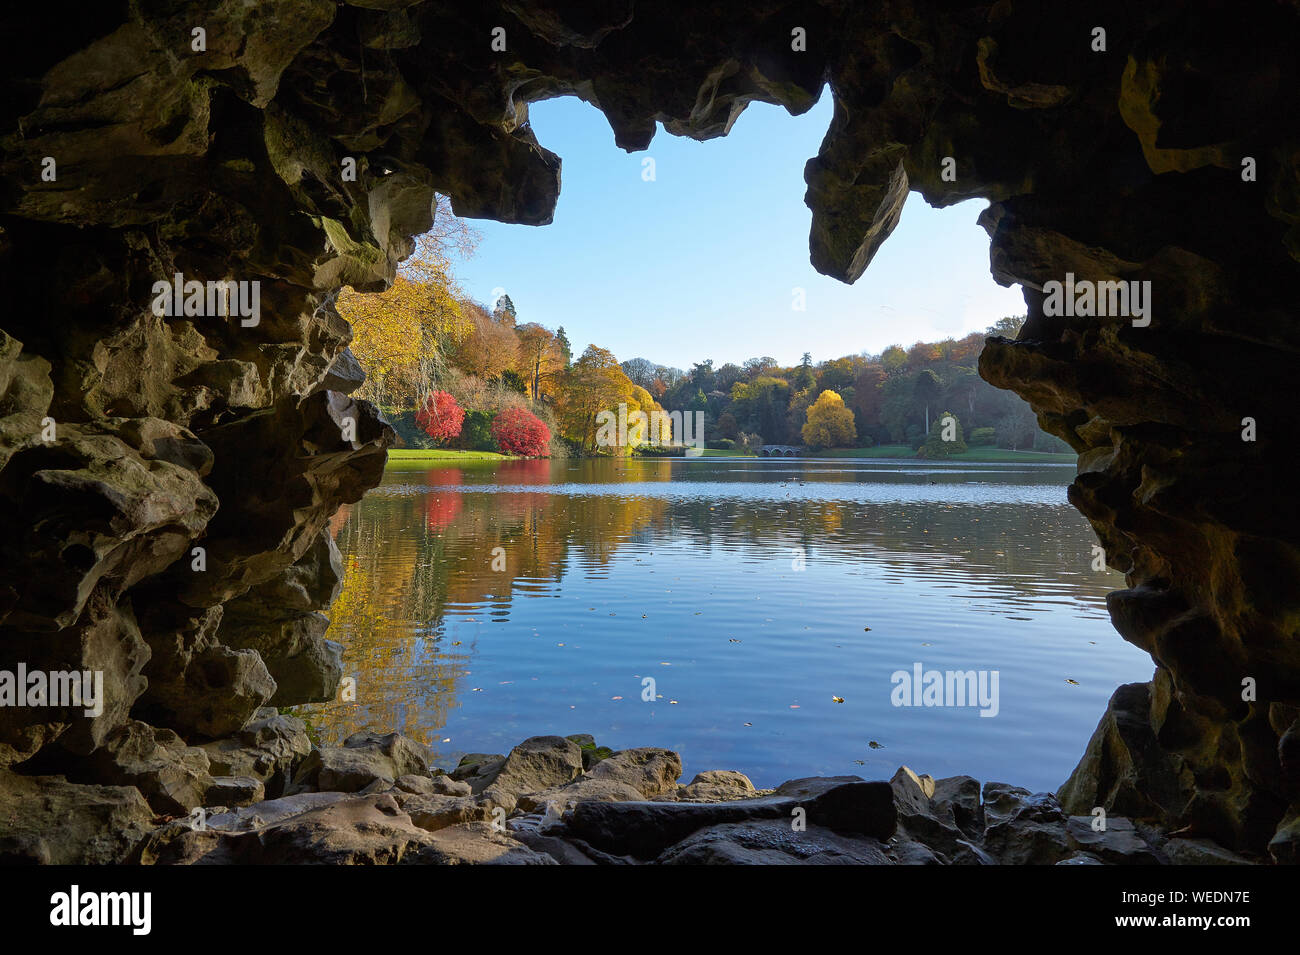 Looking out from the grotto over the lake to distant bridge and colourful trees at Stourhead Wiltshire UK in late autumn Stock Photo